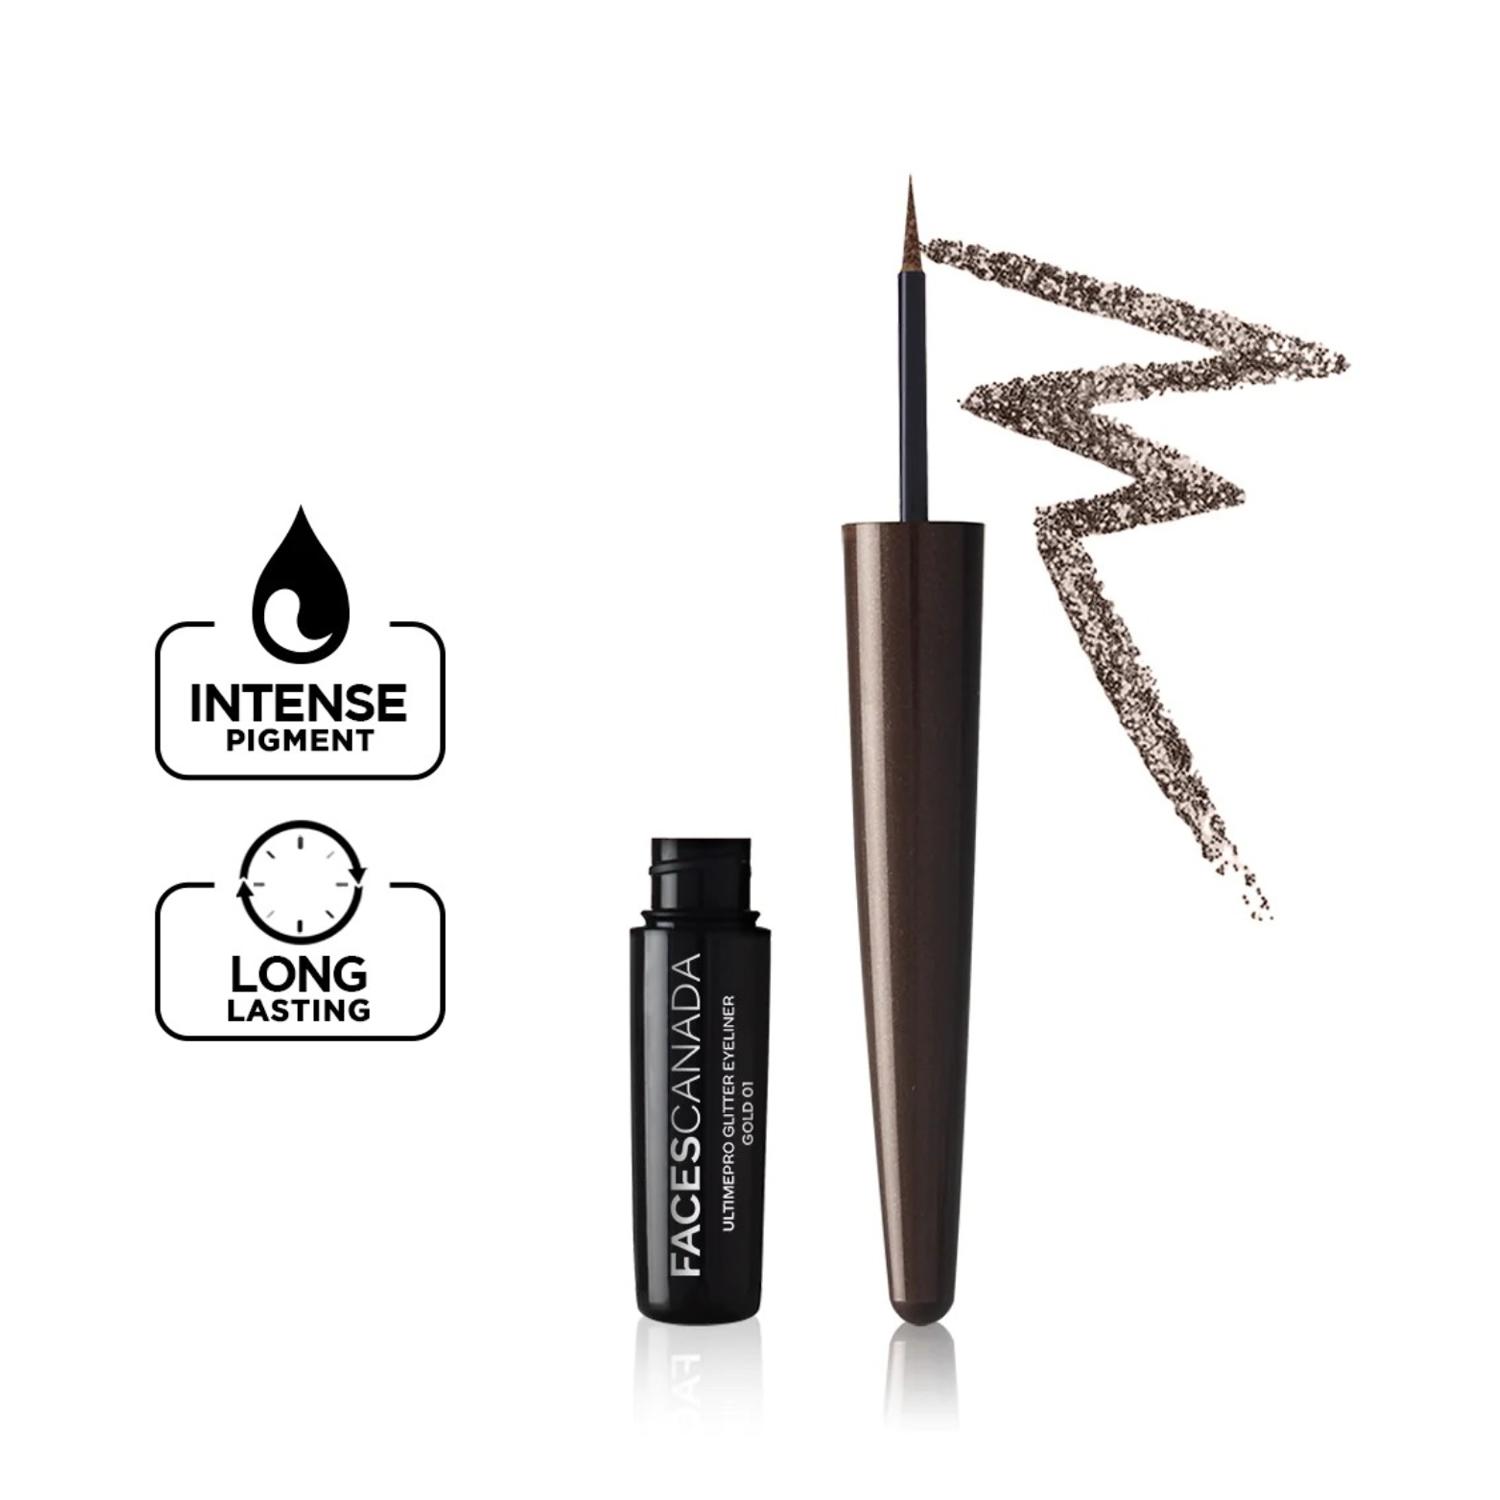 Faces Canada | Faces Canada Ultime Pro Glitter Eyeliner - Copper 02, Shimmery Finish, Long-Lasting (1.7 ml)